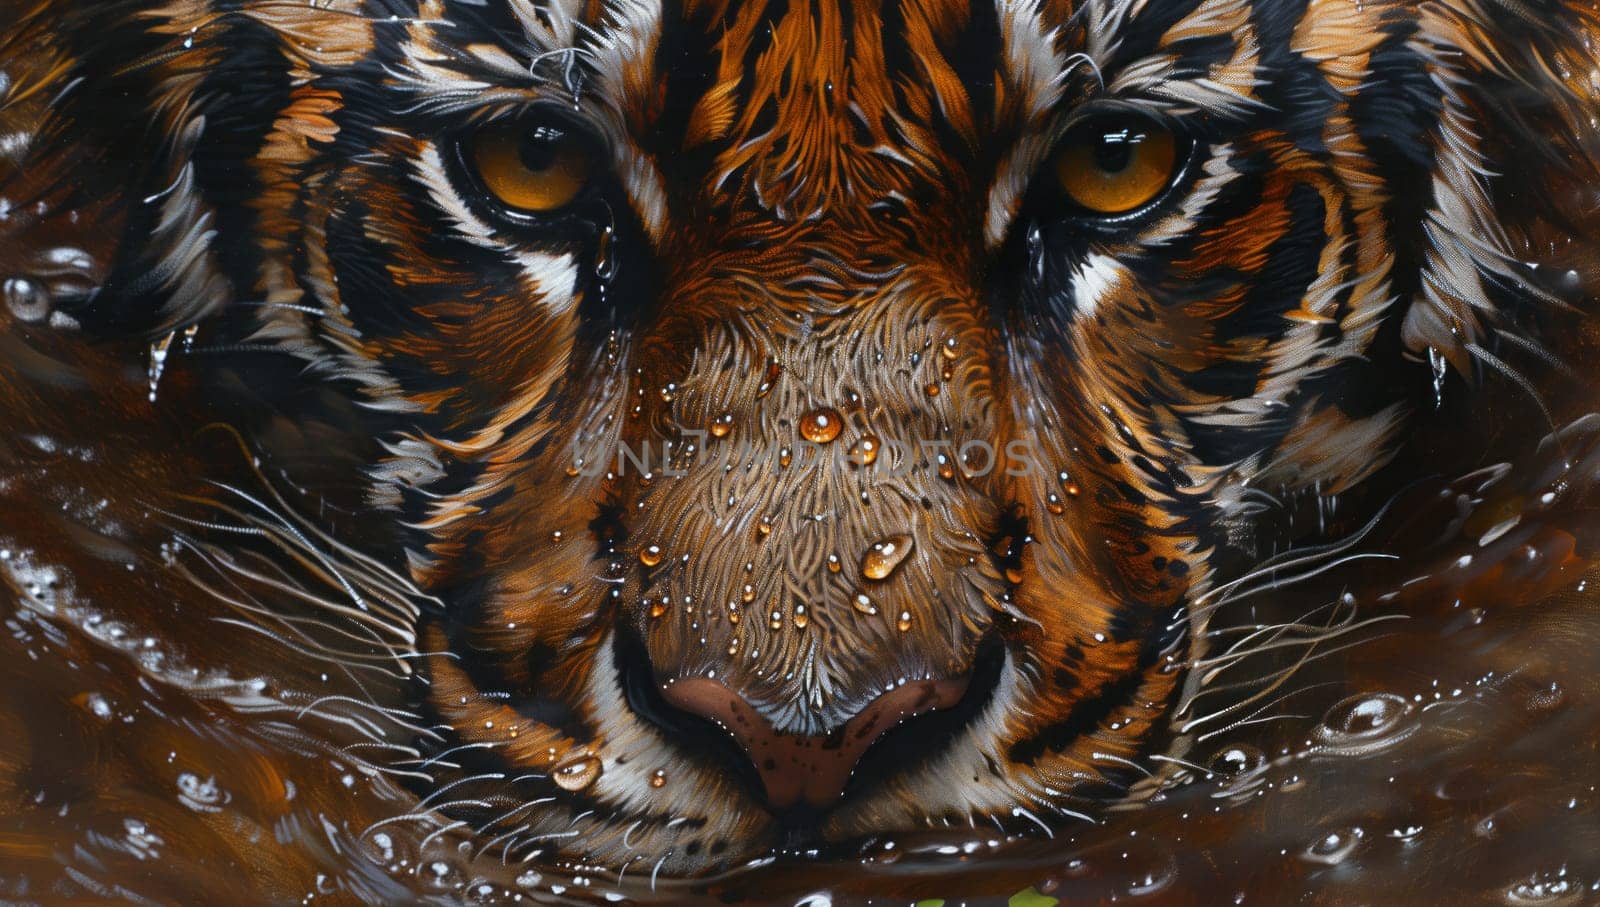 A closeup of a Siberian tigers head with its golden fur and piercing eyes reflected in the water, showcasing the beauty of this majestic carnivorous feline organism